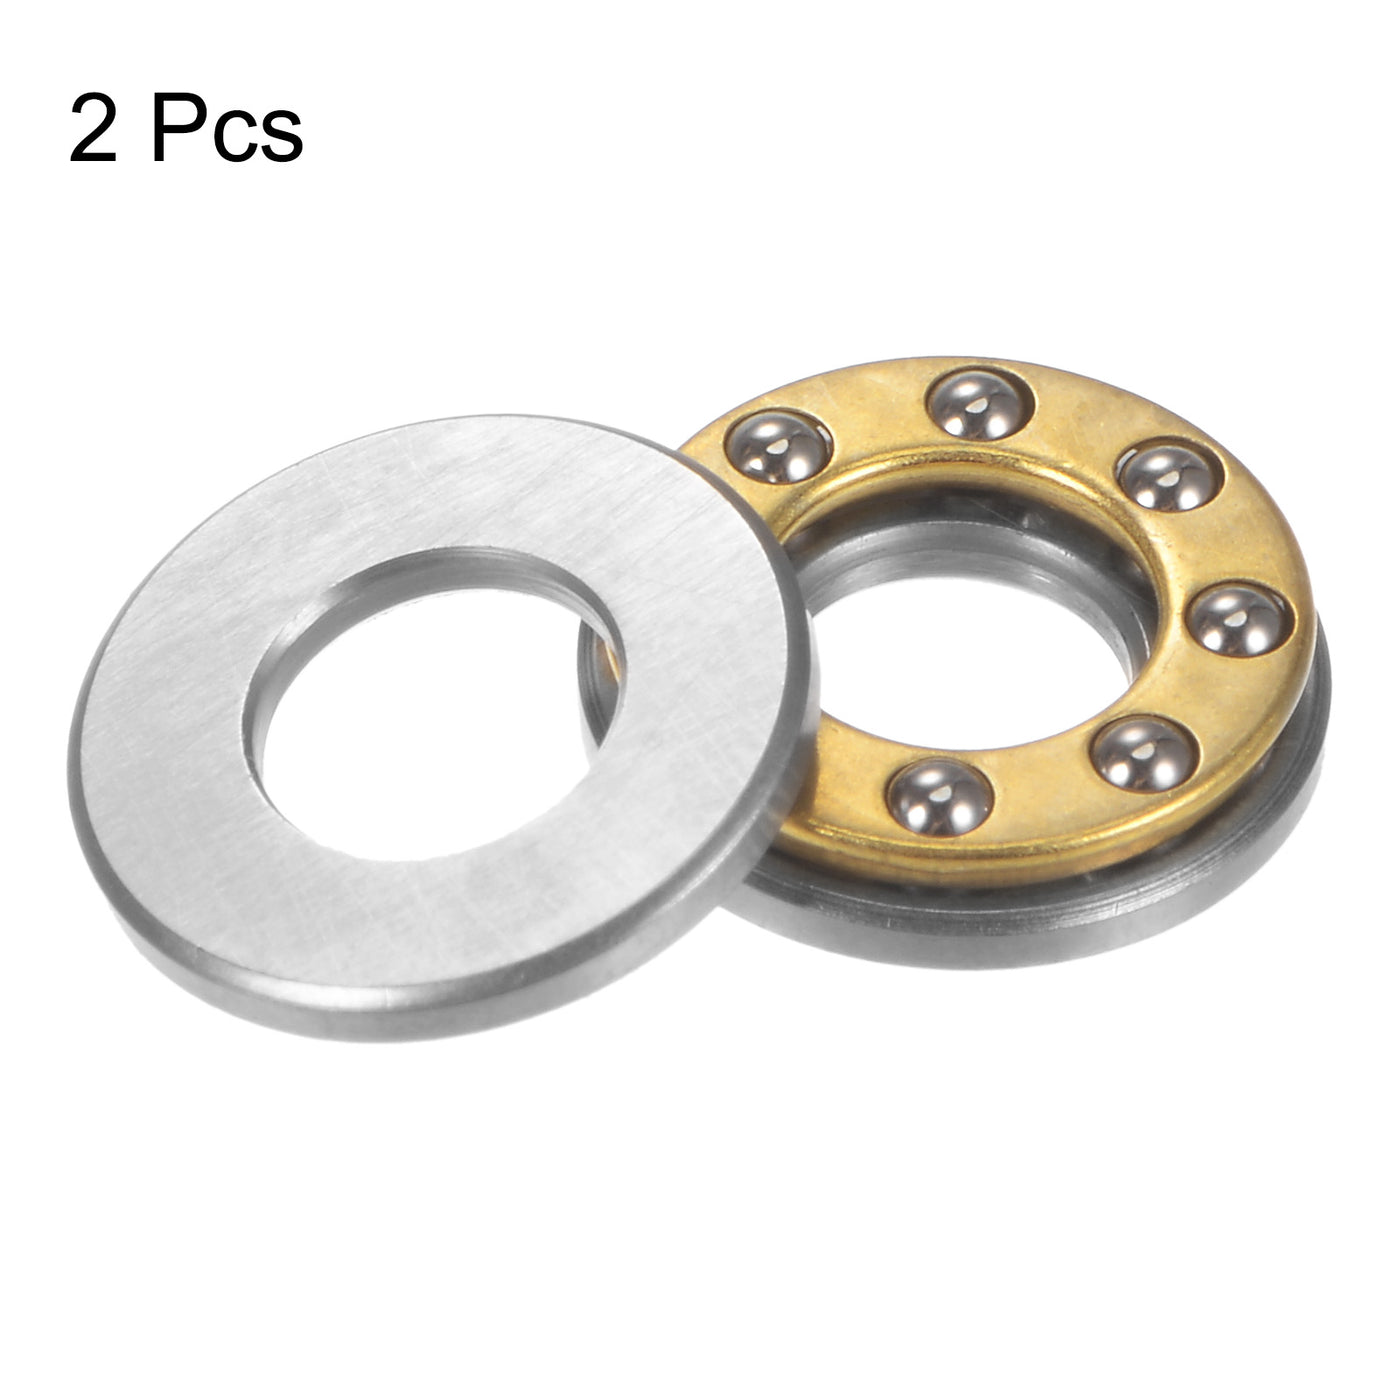 uxcell Uxcell F7-15M Thrust Ball Bearing 7x15x5mm Brass with Washers 2pcs